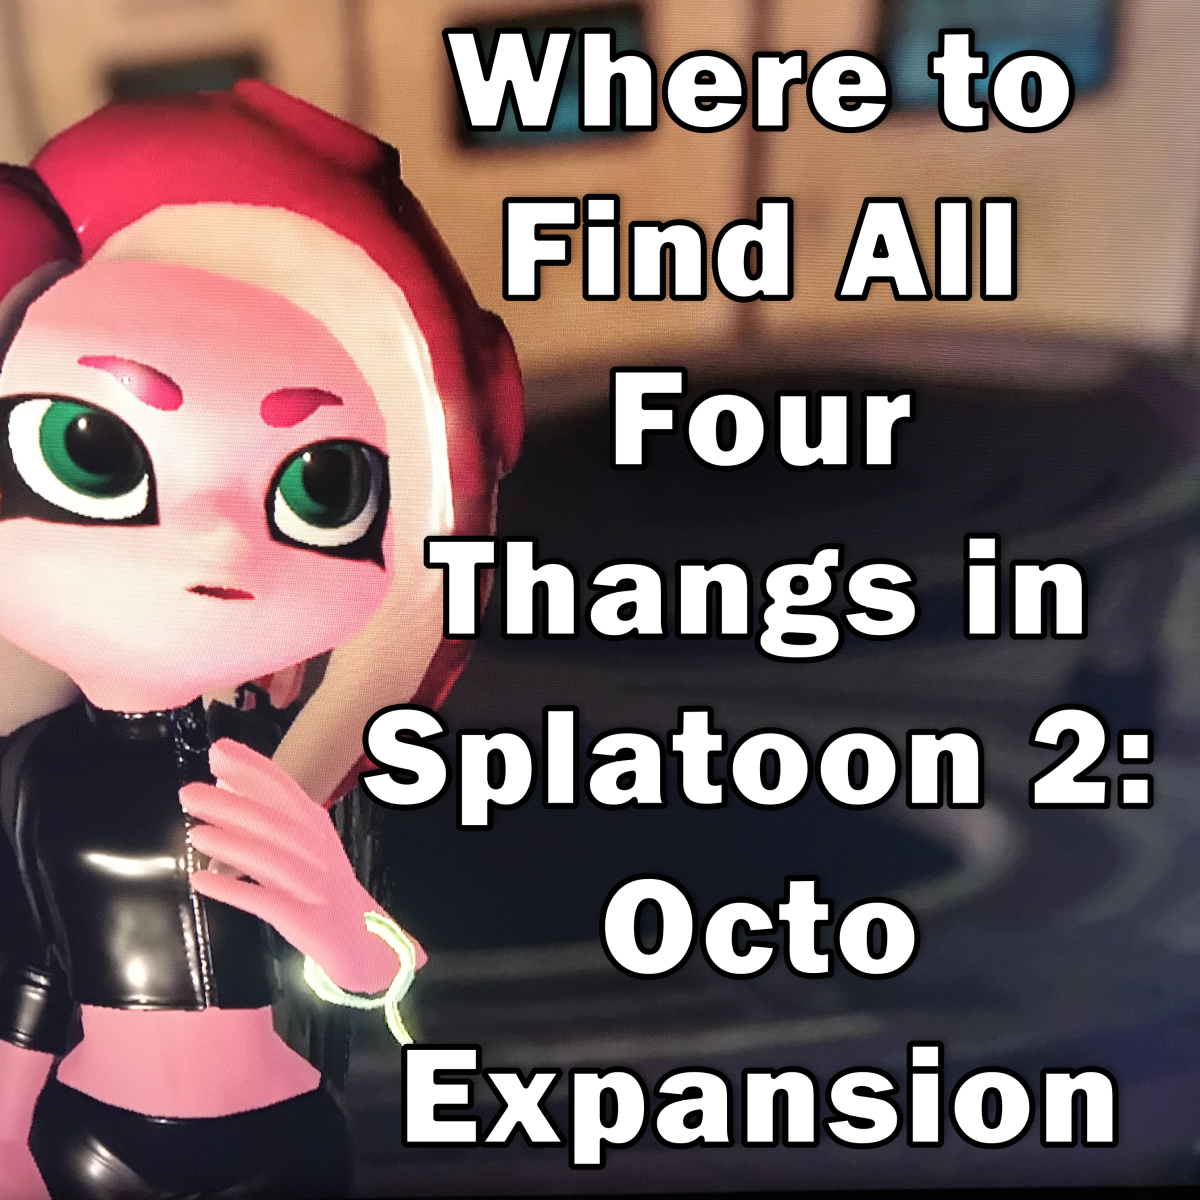 Where to Find All Four Thangs in Splatoon 2: Octo Expansion